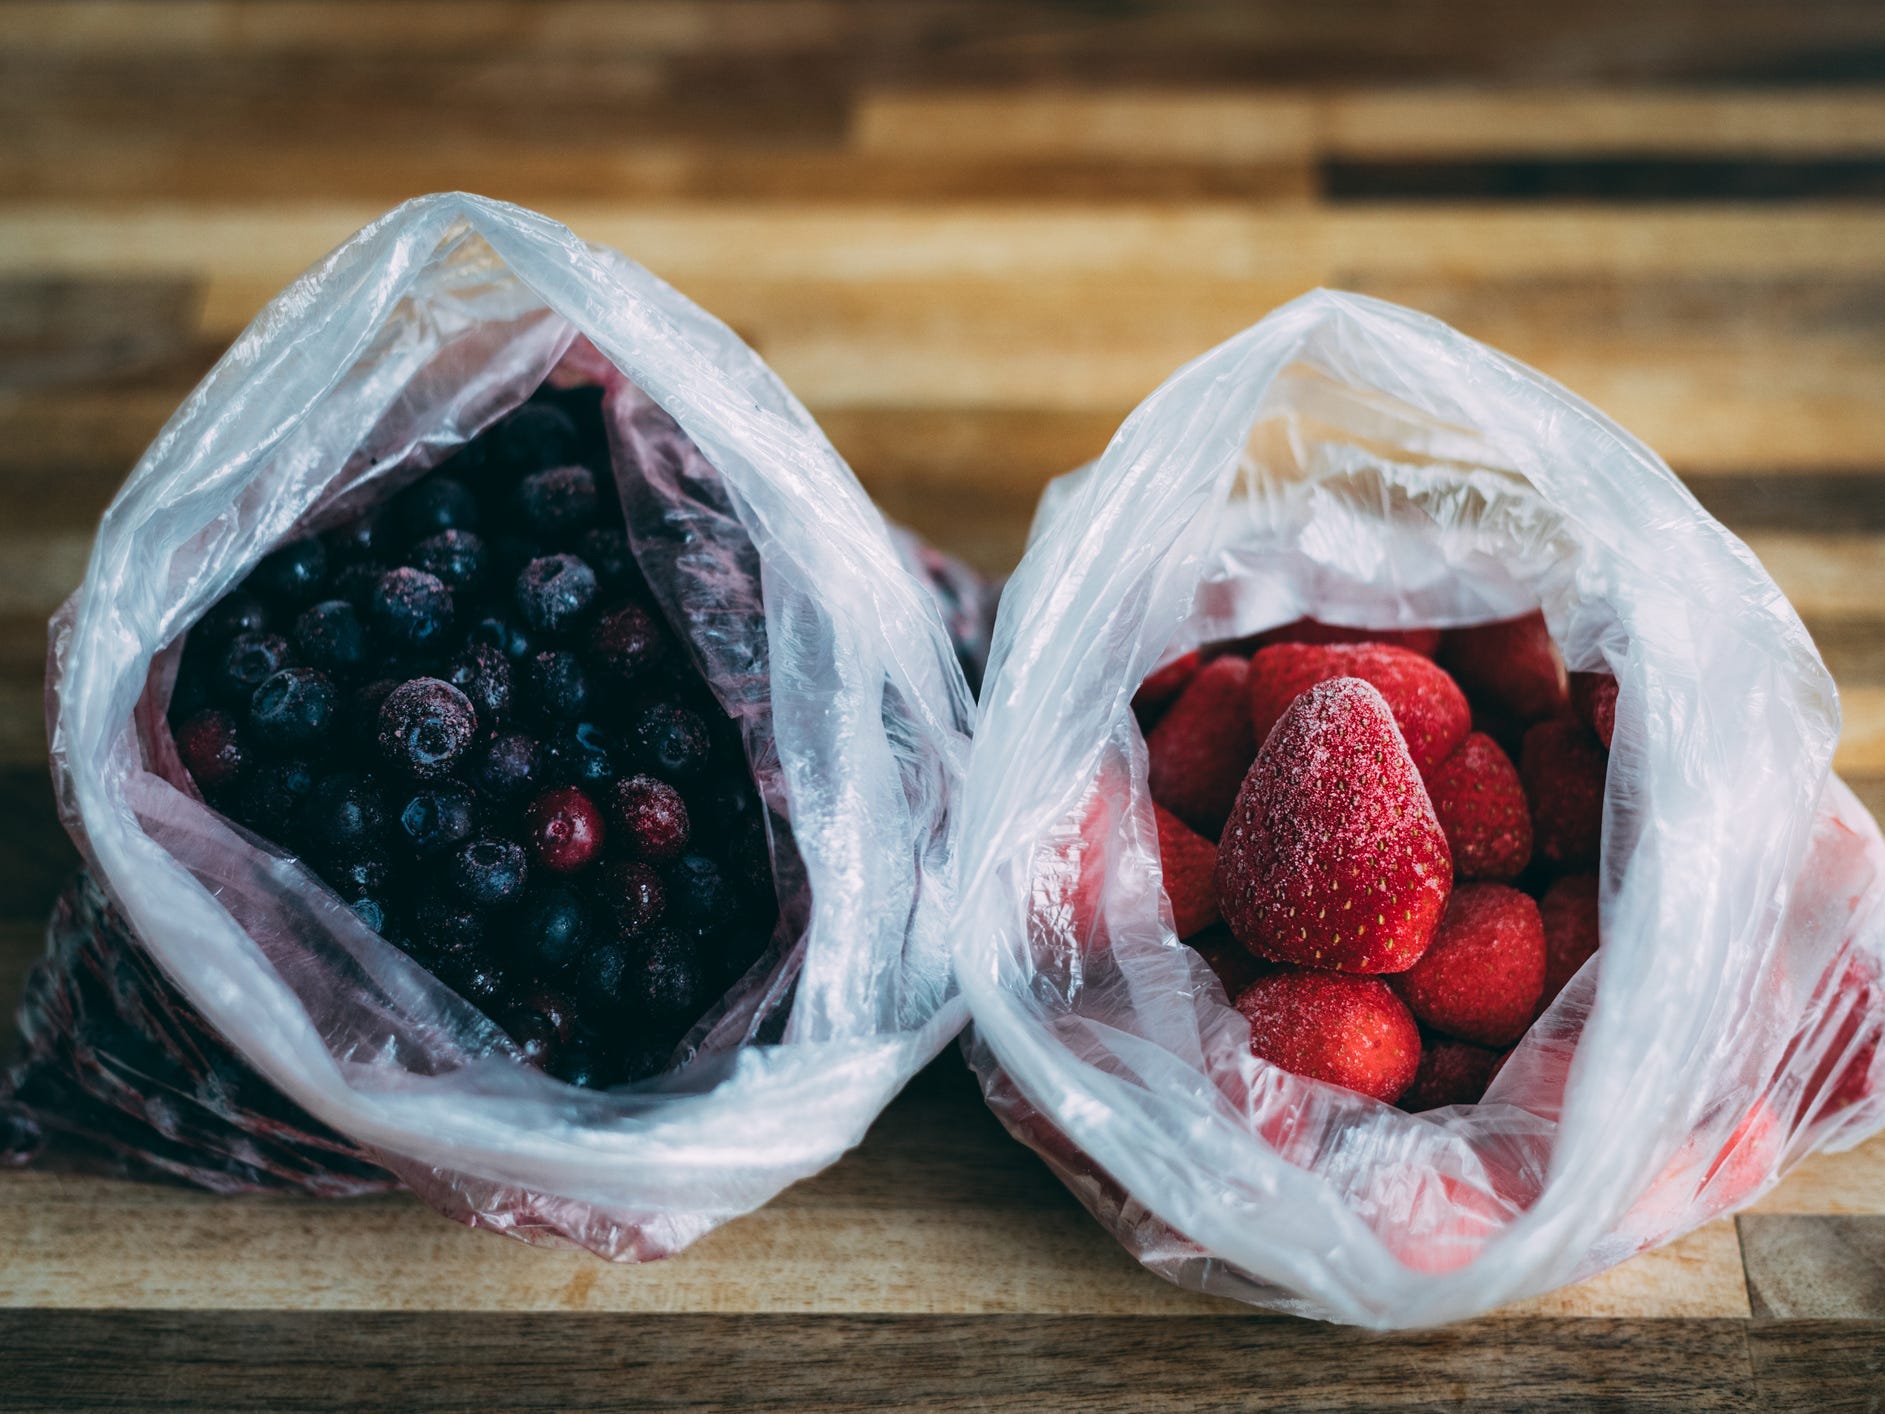 Frozen strawberries and frozen blueberries in their own plastic bags